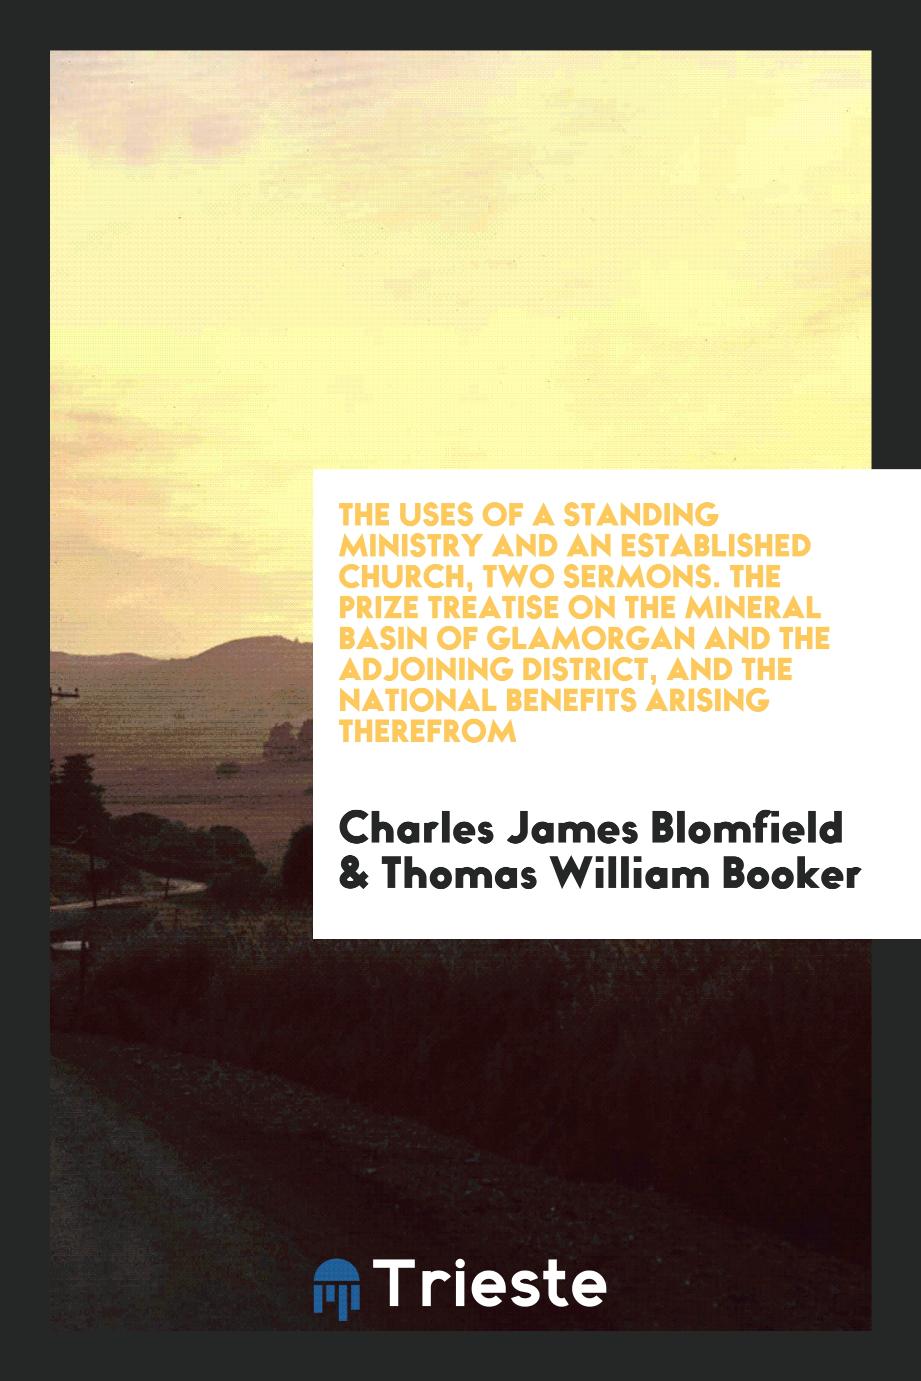 The Uses of a Standing Ministry and an Established Church, Two Sermons. The Prize Treatise on the Mineral Basin of Glamorgan and the Adjoining District, and the National Benefits Arising Therefrom